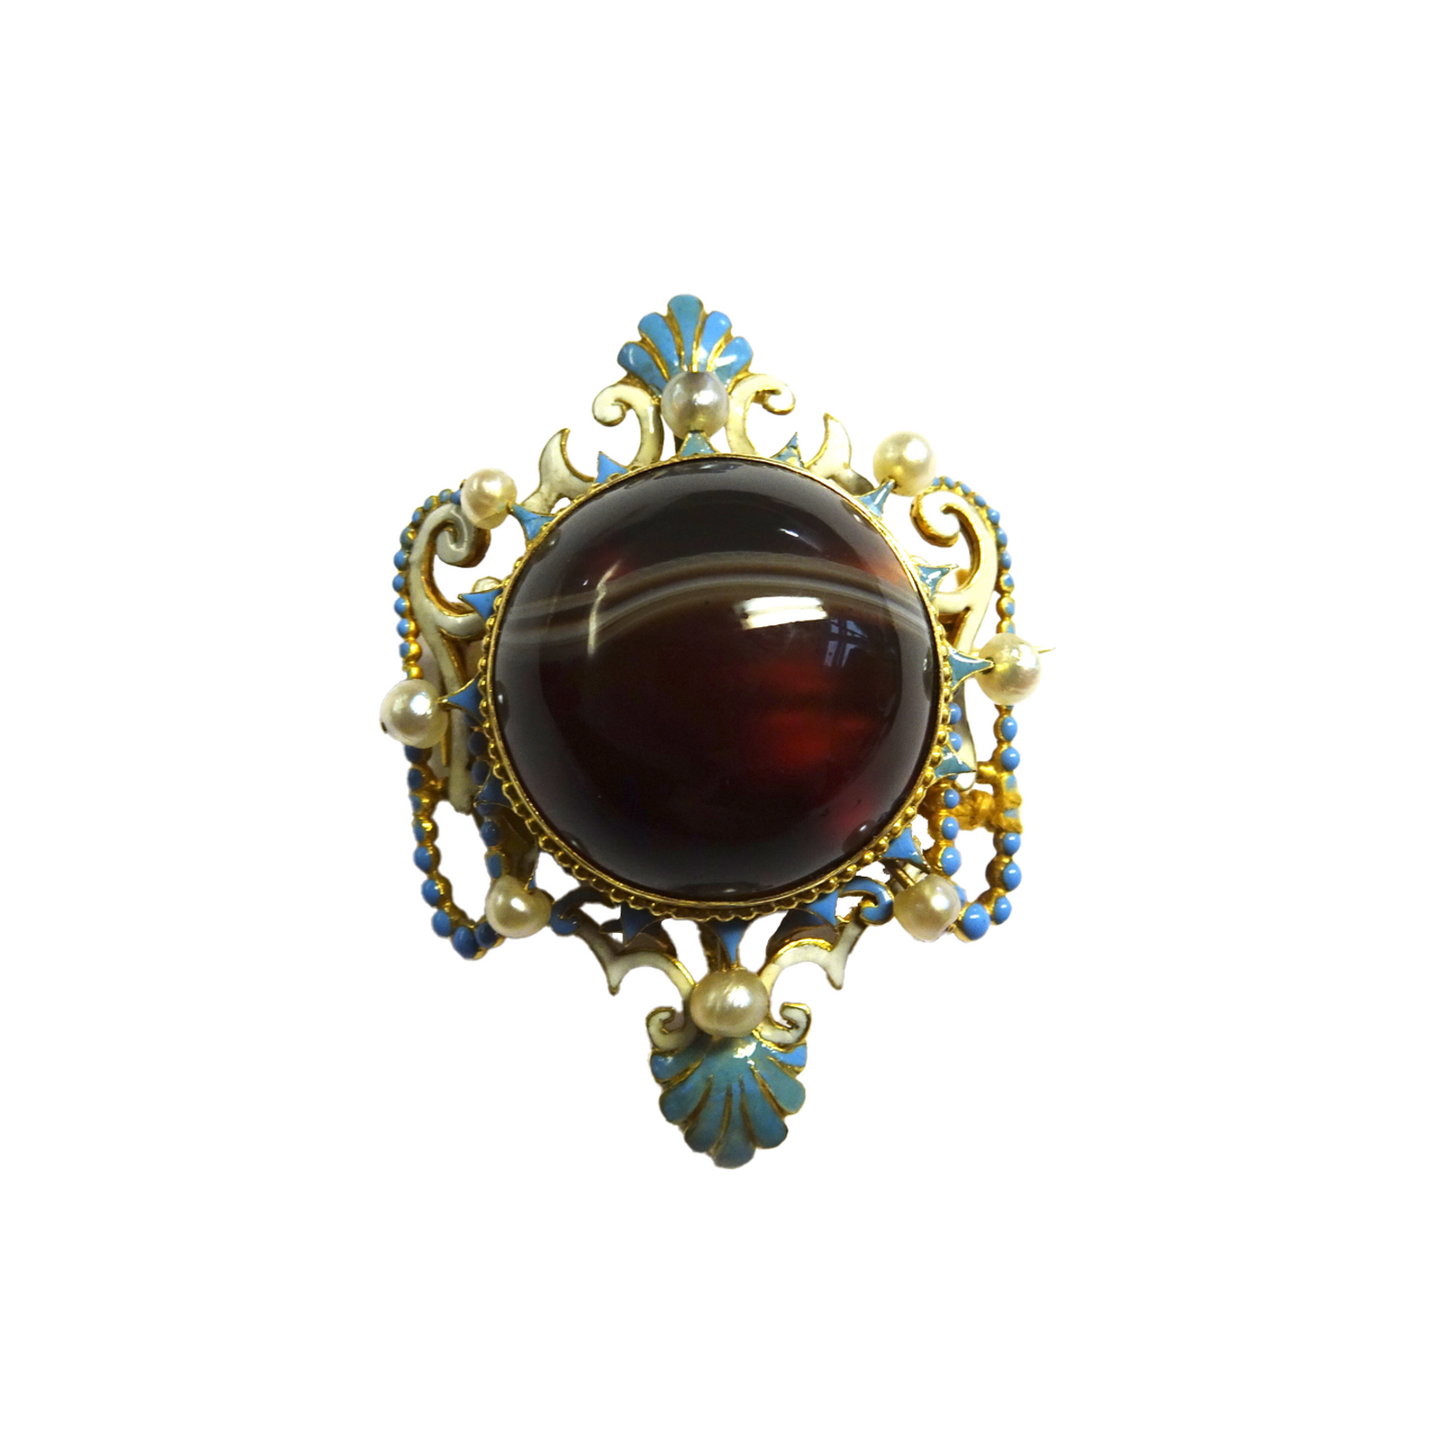 Antique 18KT Yellow Gold Carnelian Agate, Enamel & Natural Pearl Brooch front